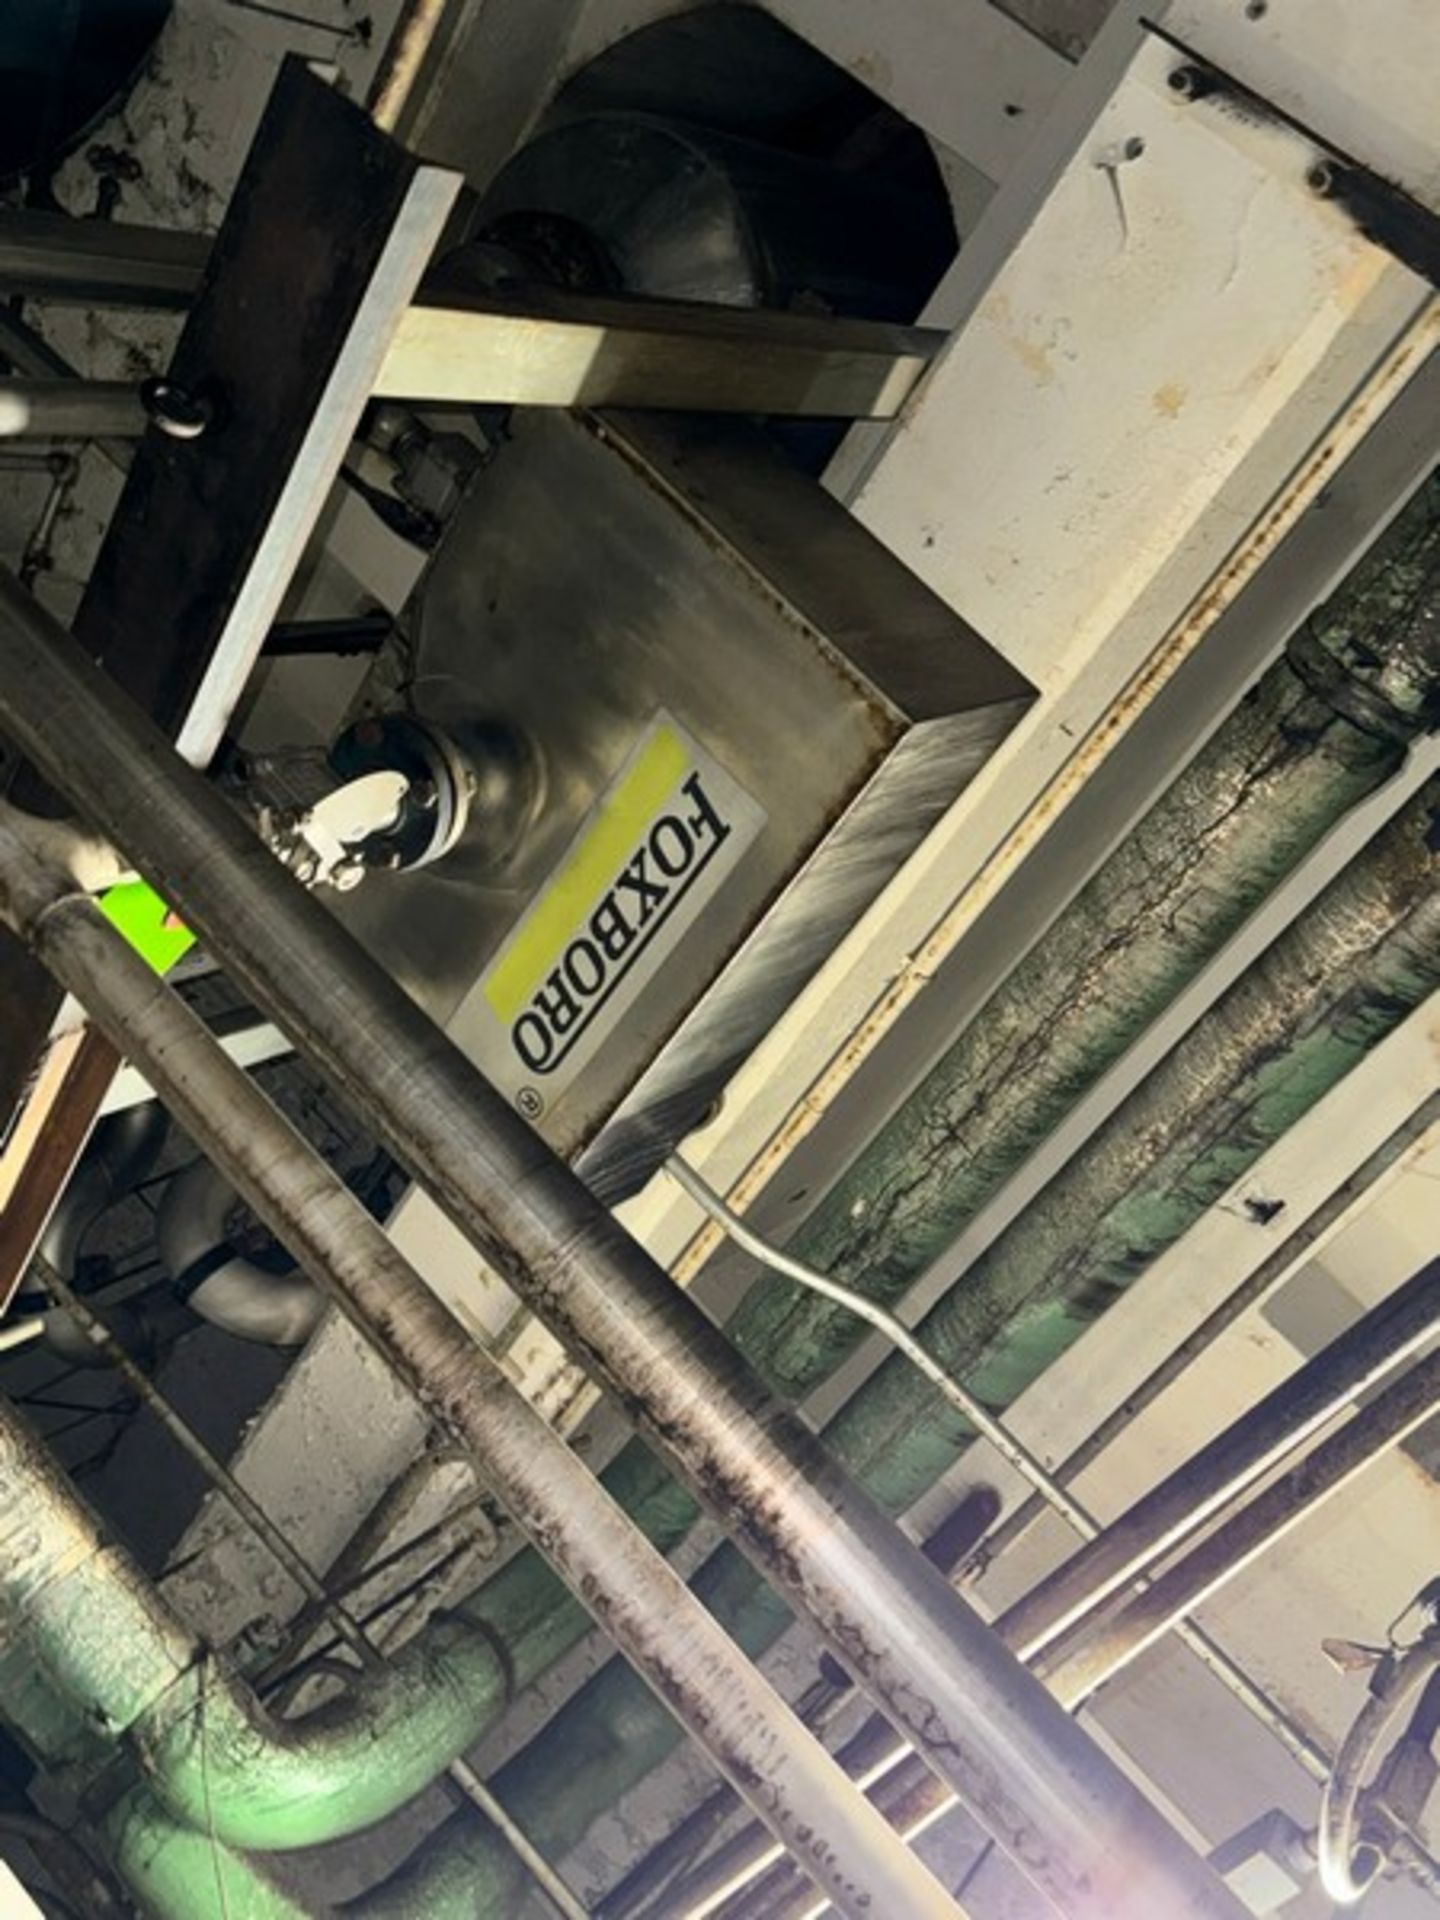 Foxboro Magnetic Flow Meter, with Digital Read Out (LOCATED IN FREEHOLD, N.J.) - Image 3 of 3